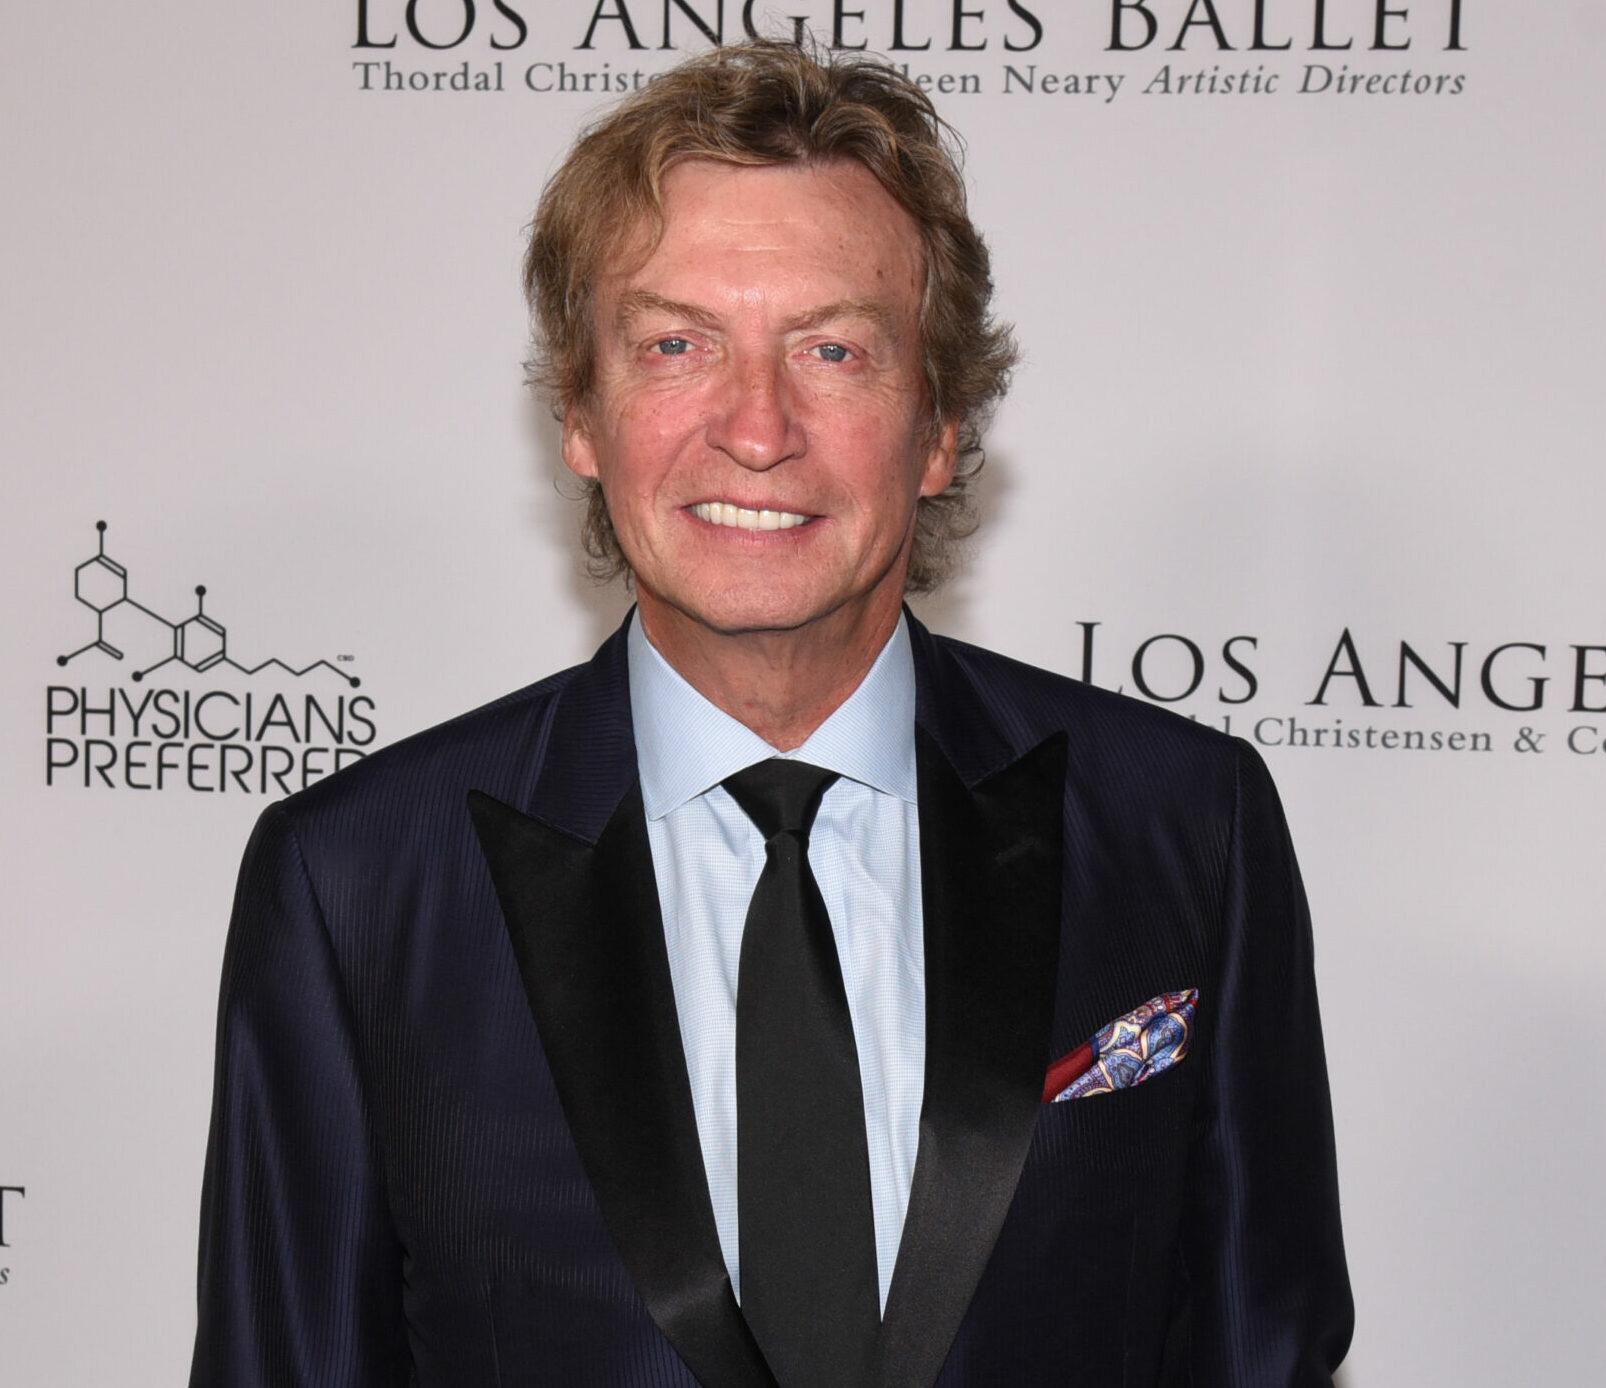 American Idol's Nigel Lythgoe Sued For Another Alleged Sexual Assault